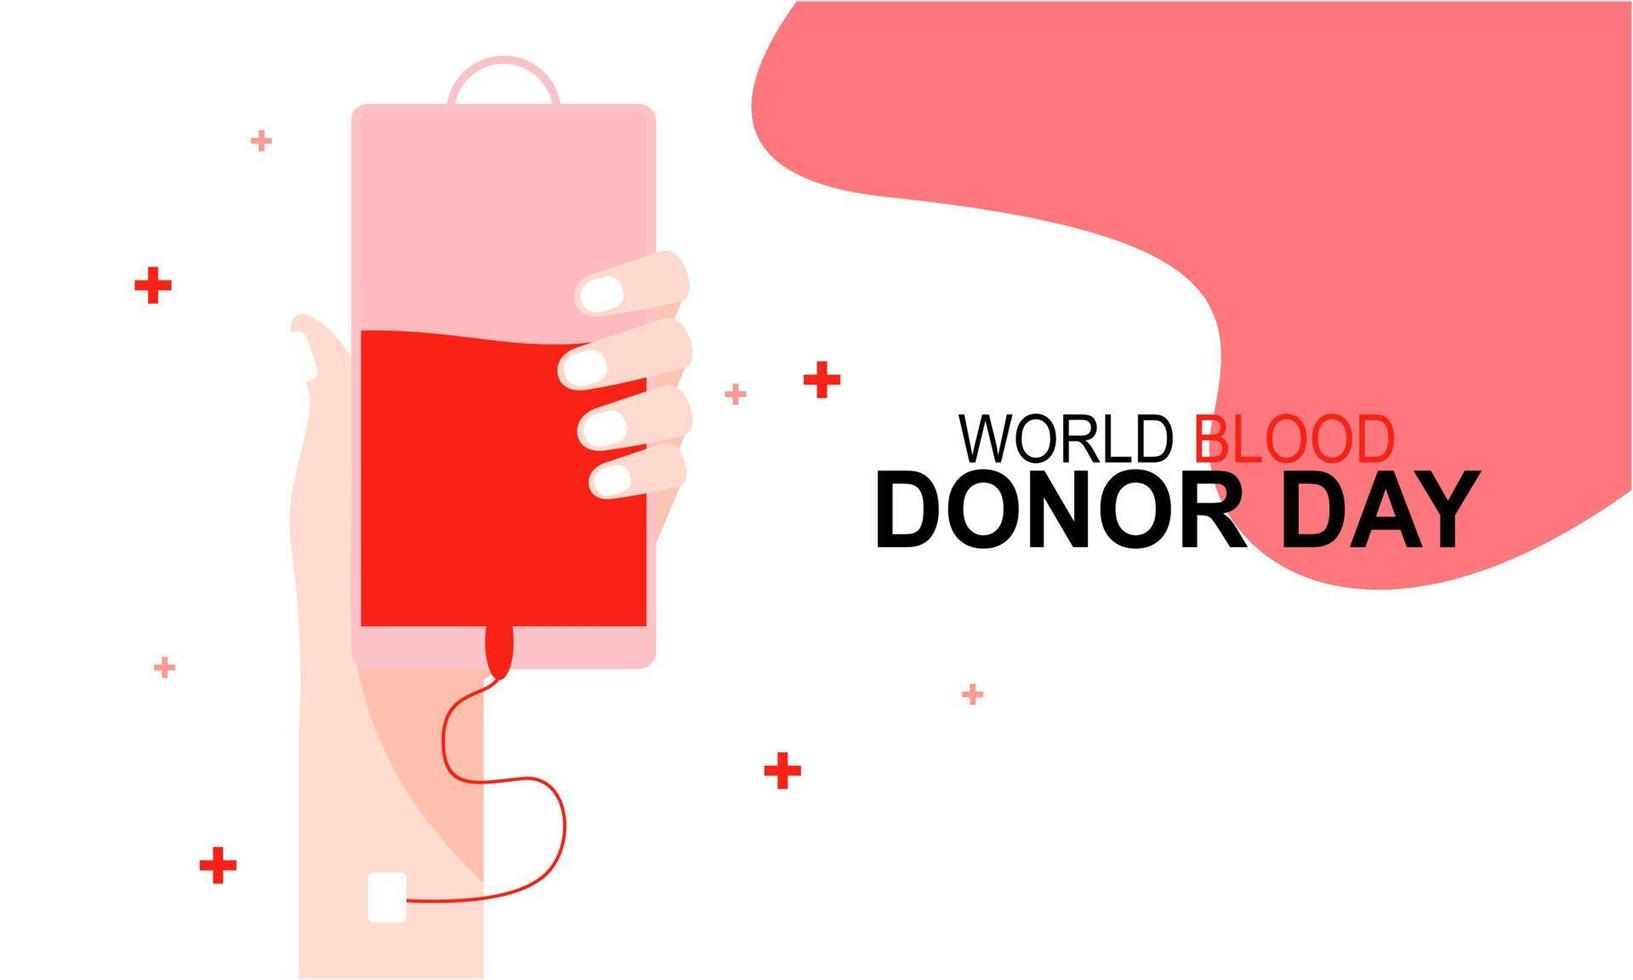 World blood donor day heart and blood drop concept poster vector